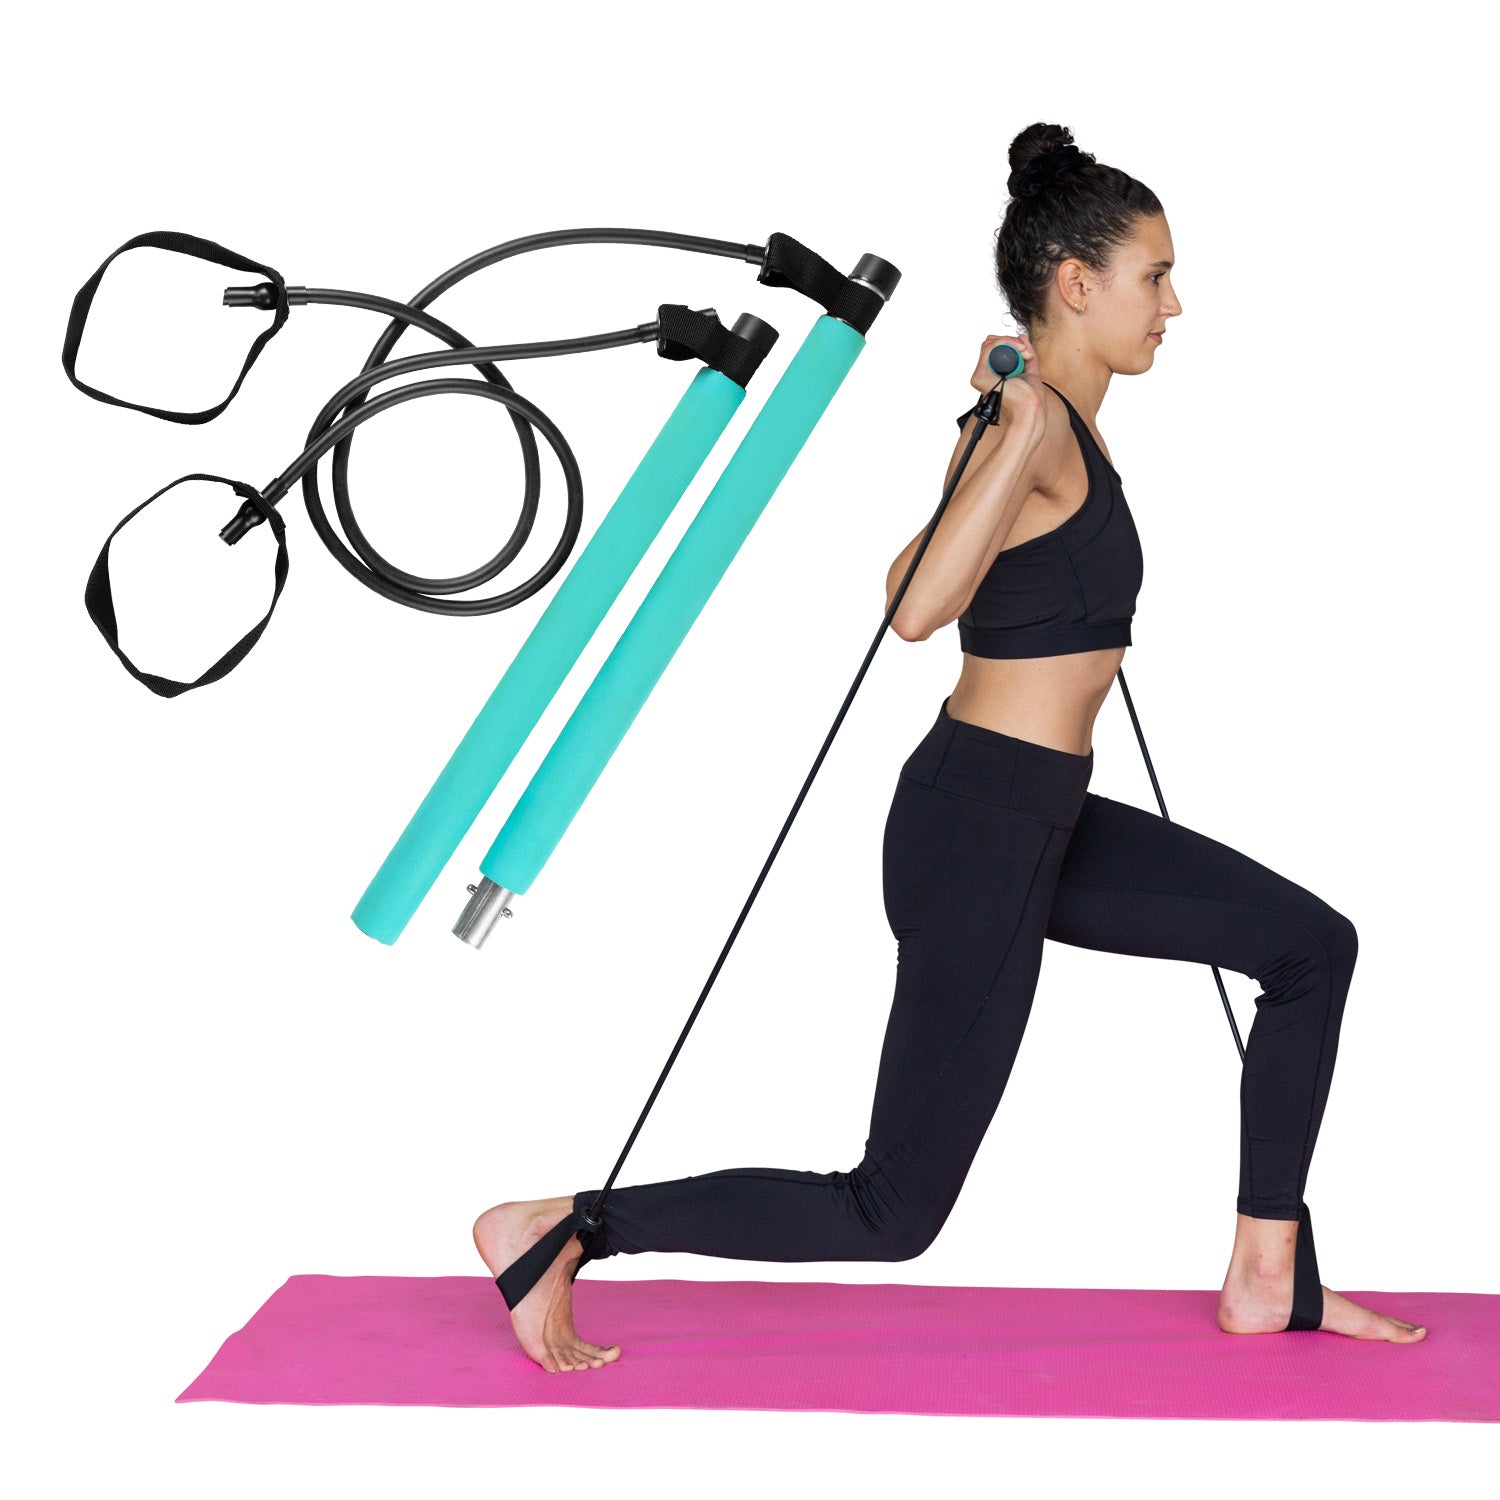 The resistance band Pilates workout that will light up every